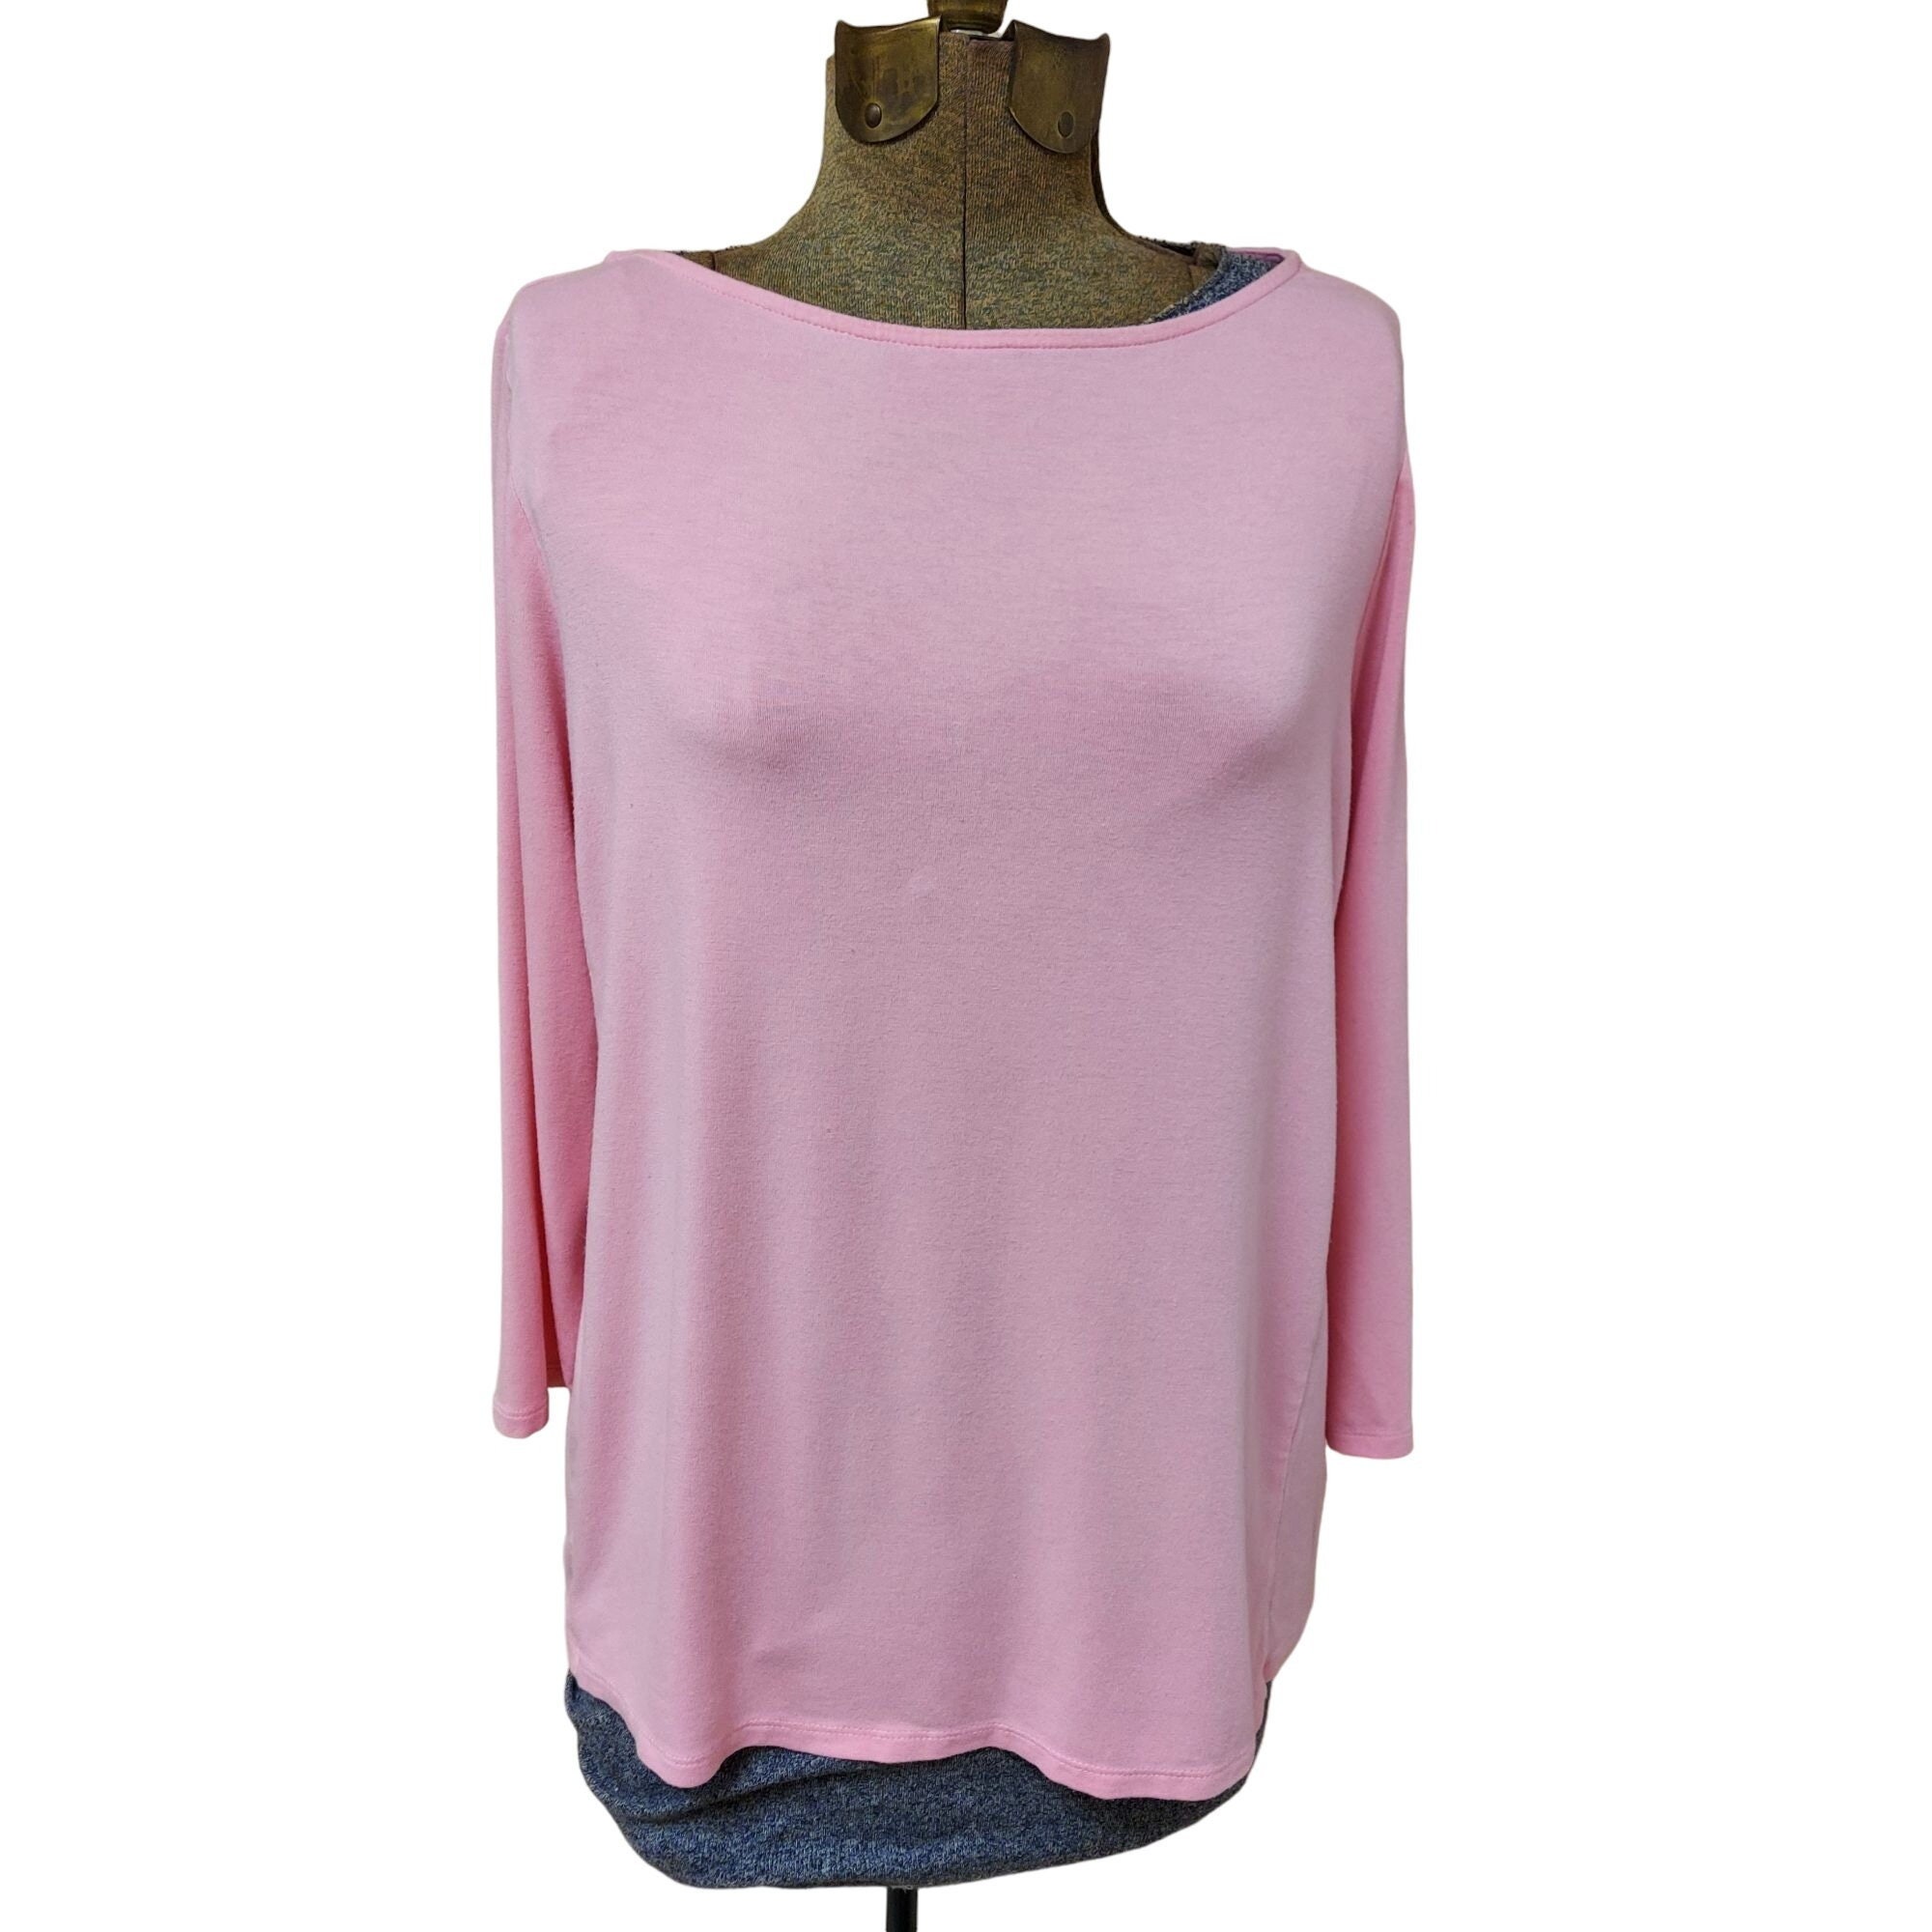 J.jill Wearever Collection Cropped Sleeve Pink Wide Neck Shirt